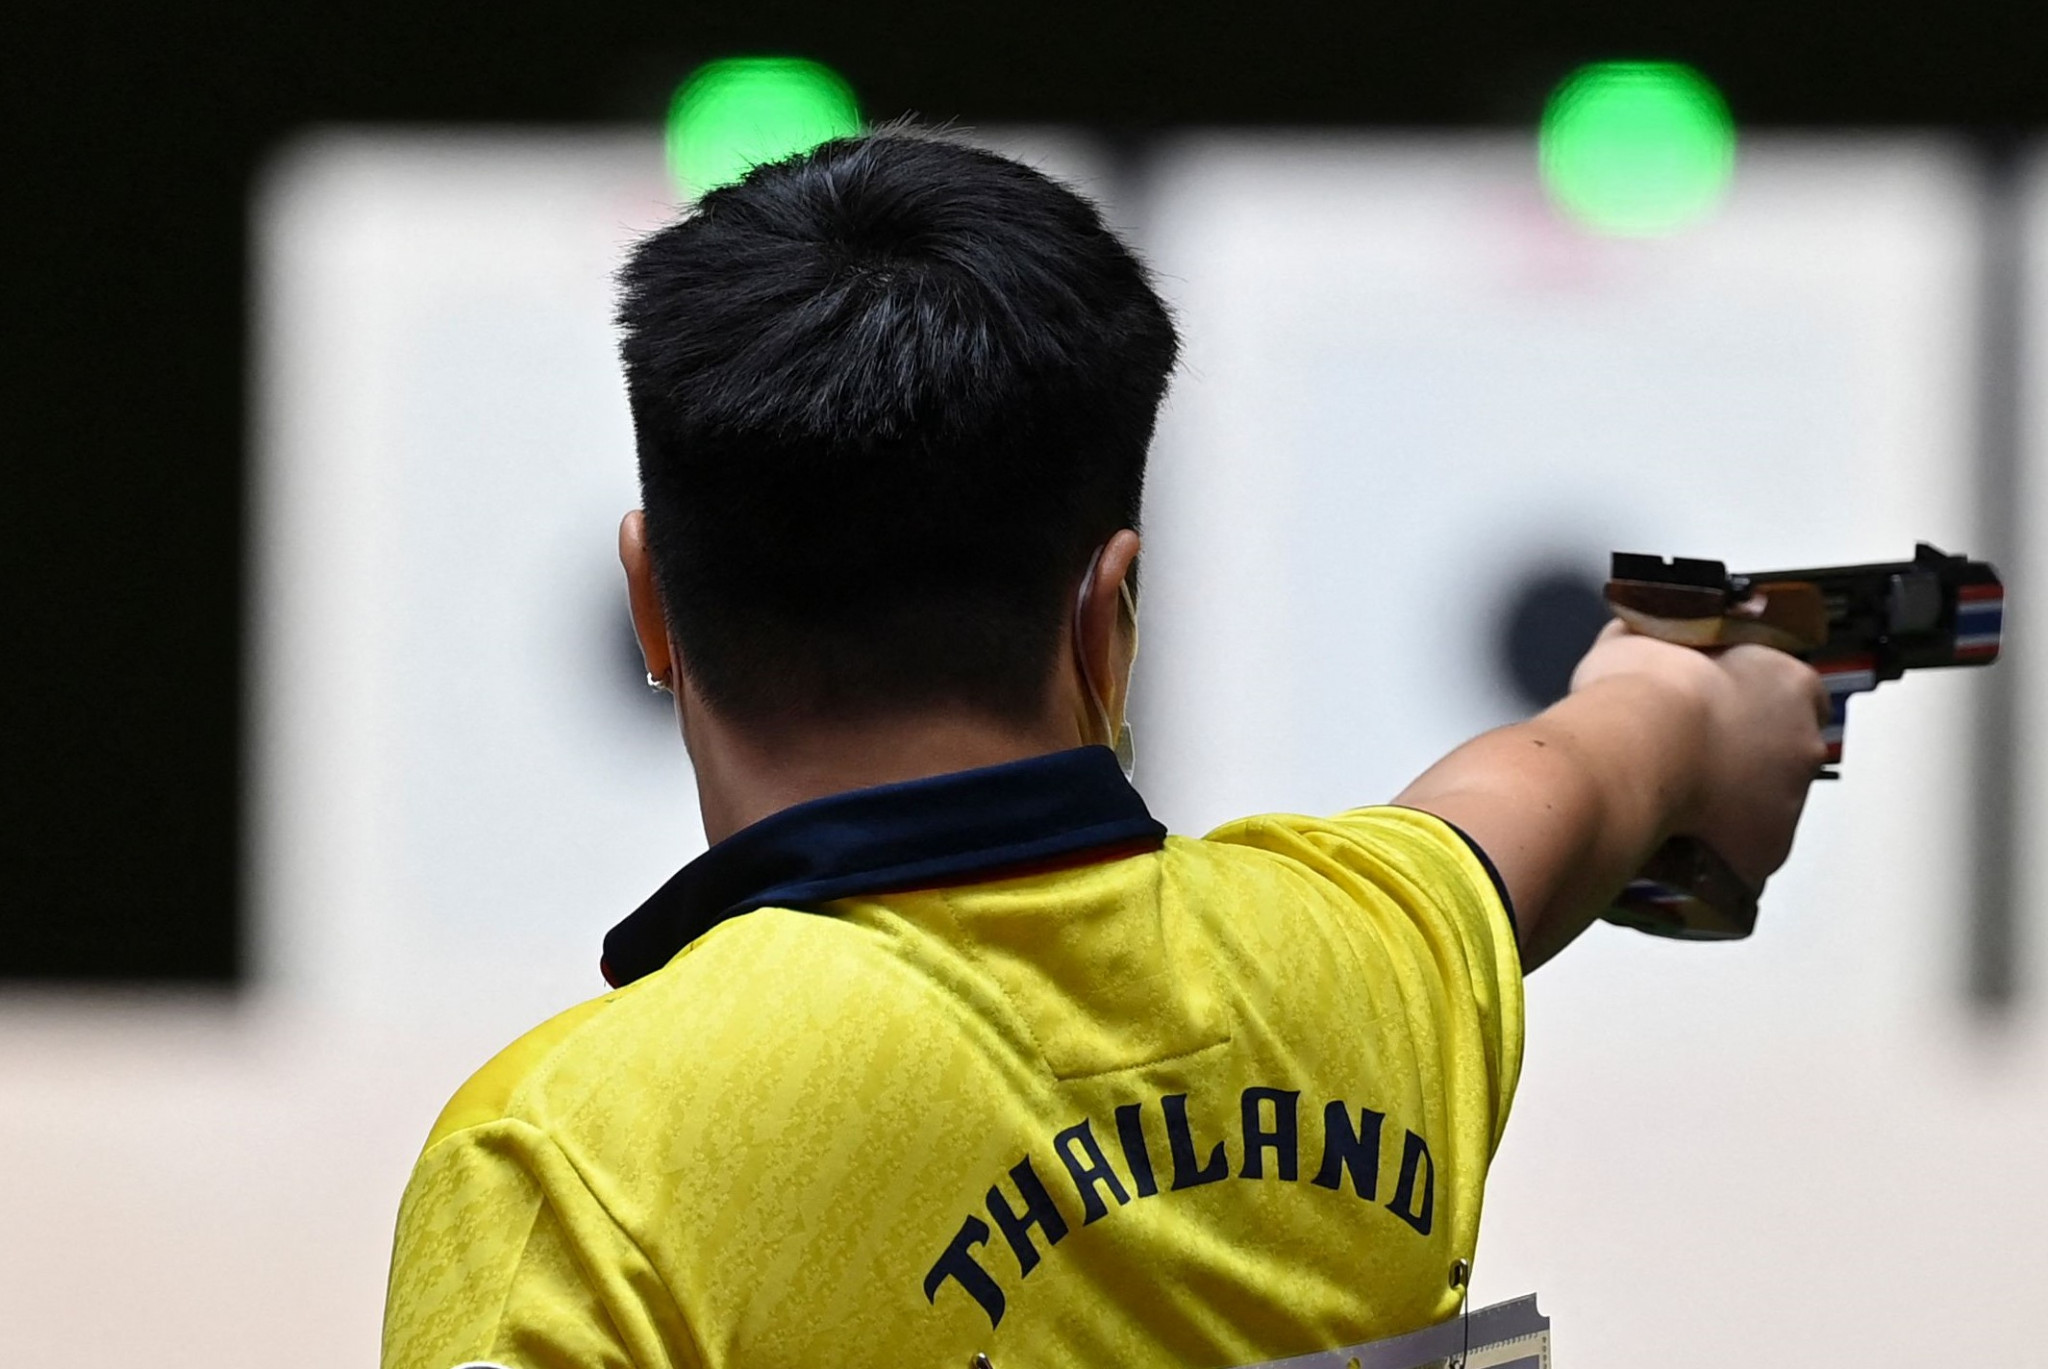 Thai shooters had a good final day at the ISSF Grand Prix in Jakarta ©Getty Images